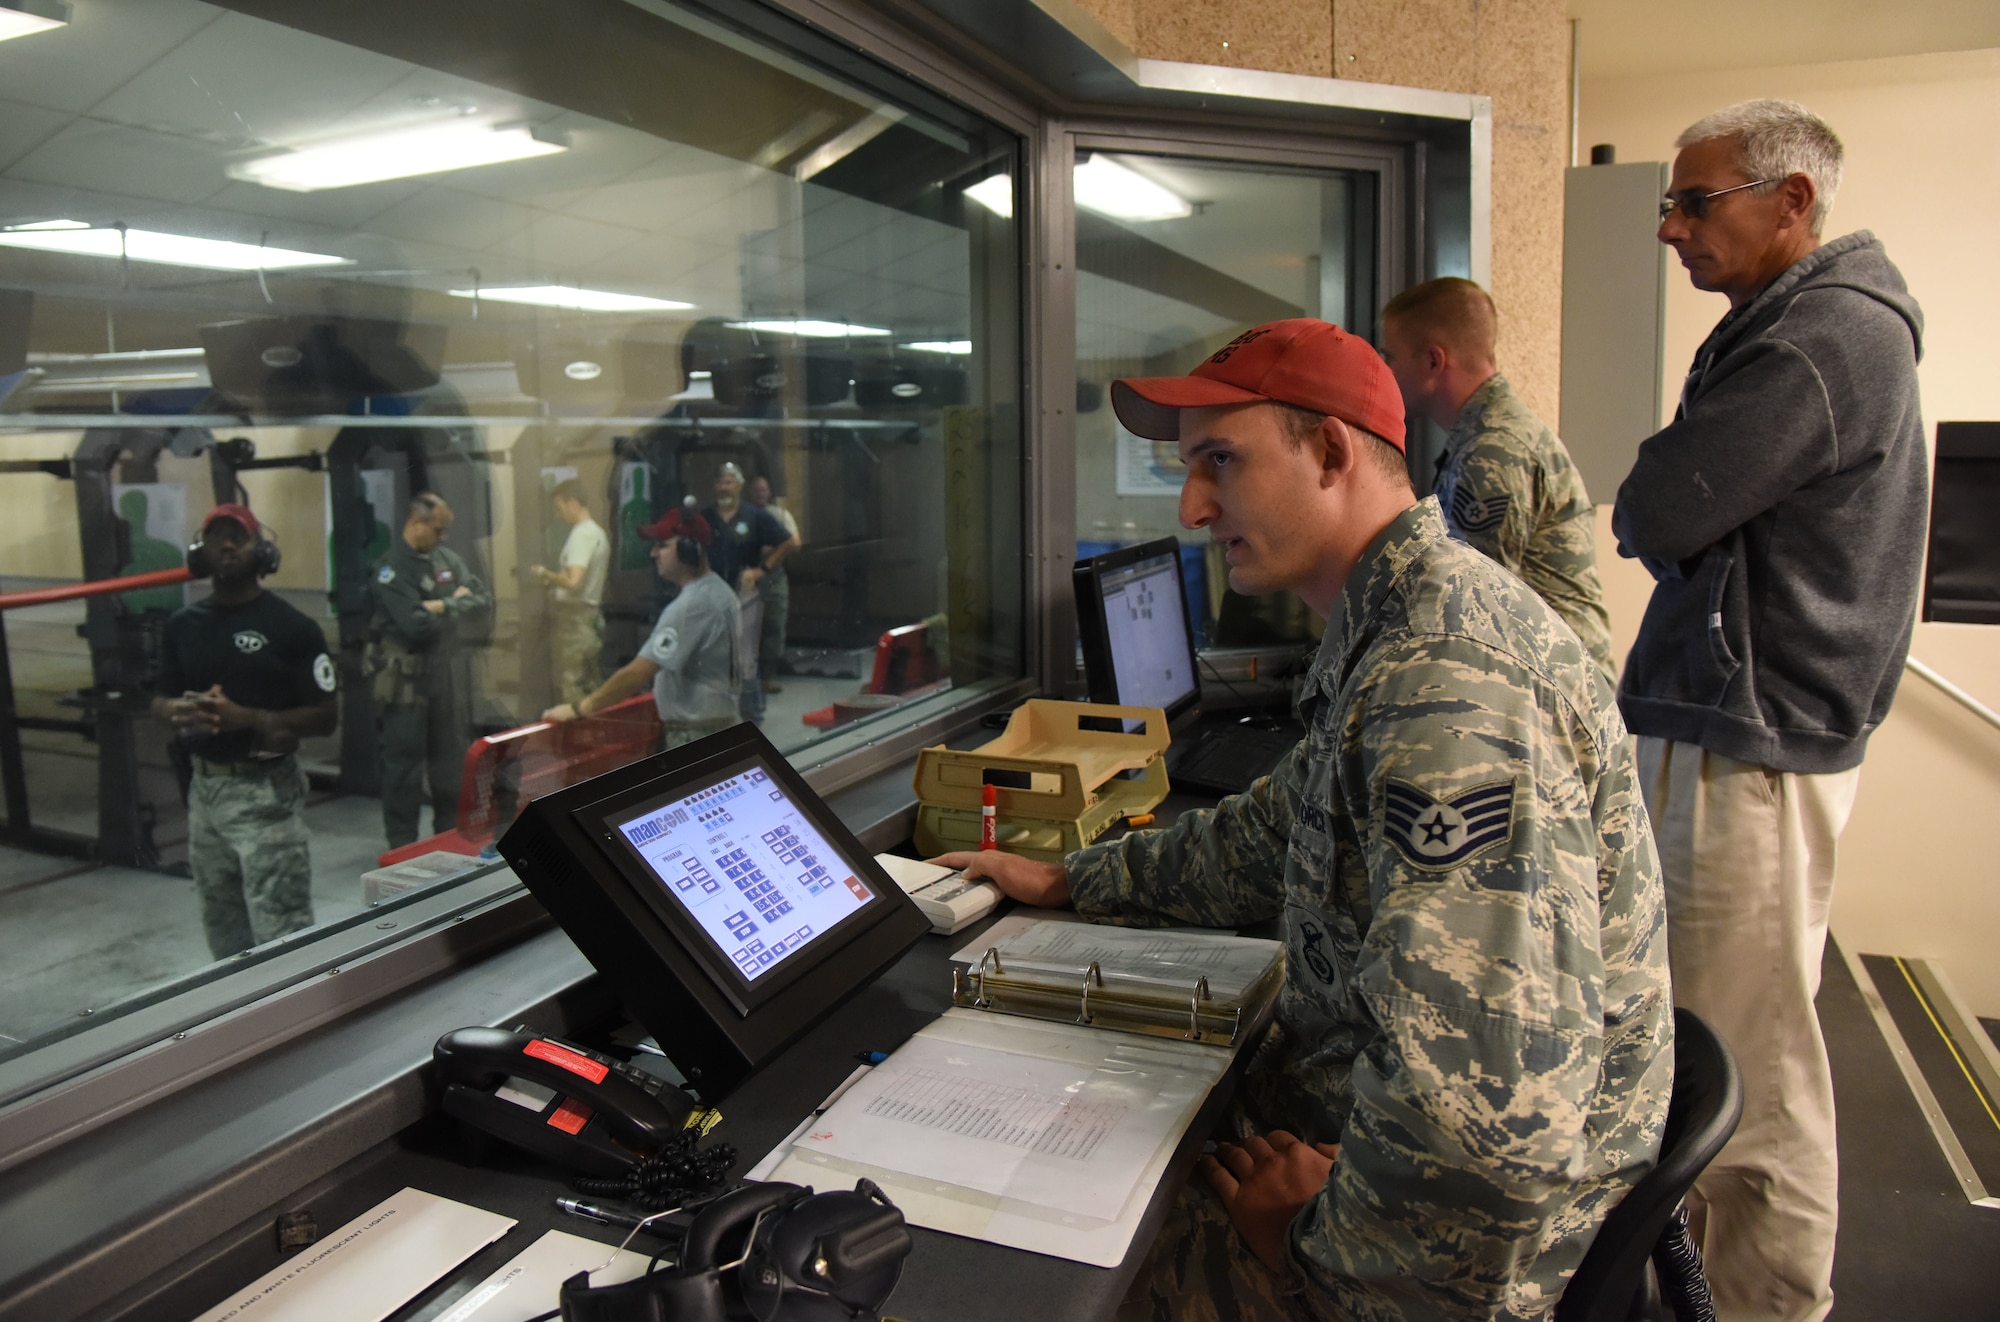 U.S. Air Force Staff Sgt. Joshua Green, 81st Security Forces Squadron combat arms instructor, provides safety instructions to personnel participating in the 81st SFS law enforcement team competition shoot in the indoor firing range at Keesler Air Force Base, Mississippi, May 16, 2018. The event was held during National Police Week, which recognizes the service of law enforcement men and women who put their lives at risk every day. (U.S. Air Force photo by Kemberly Groue)